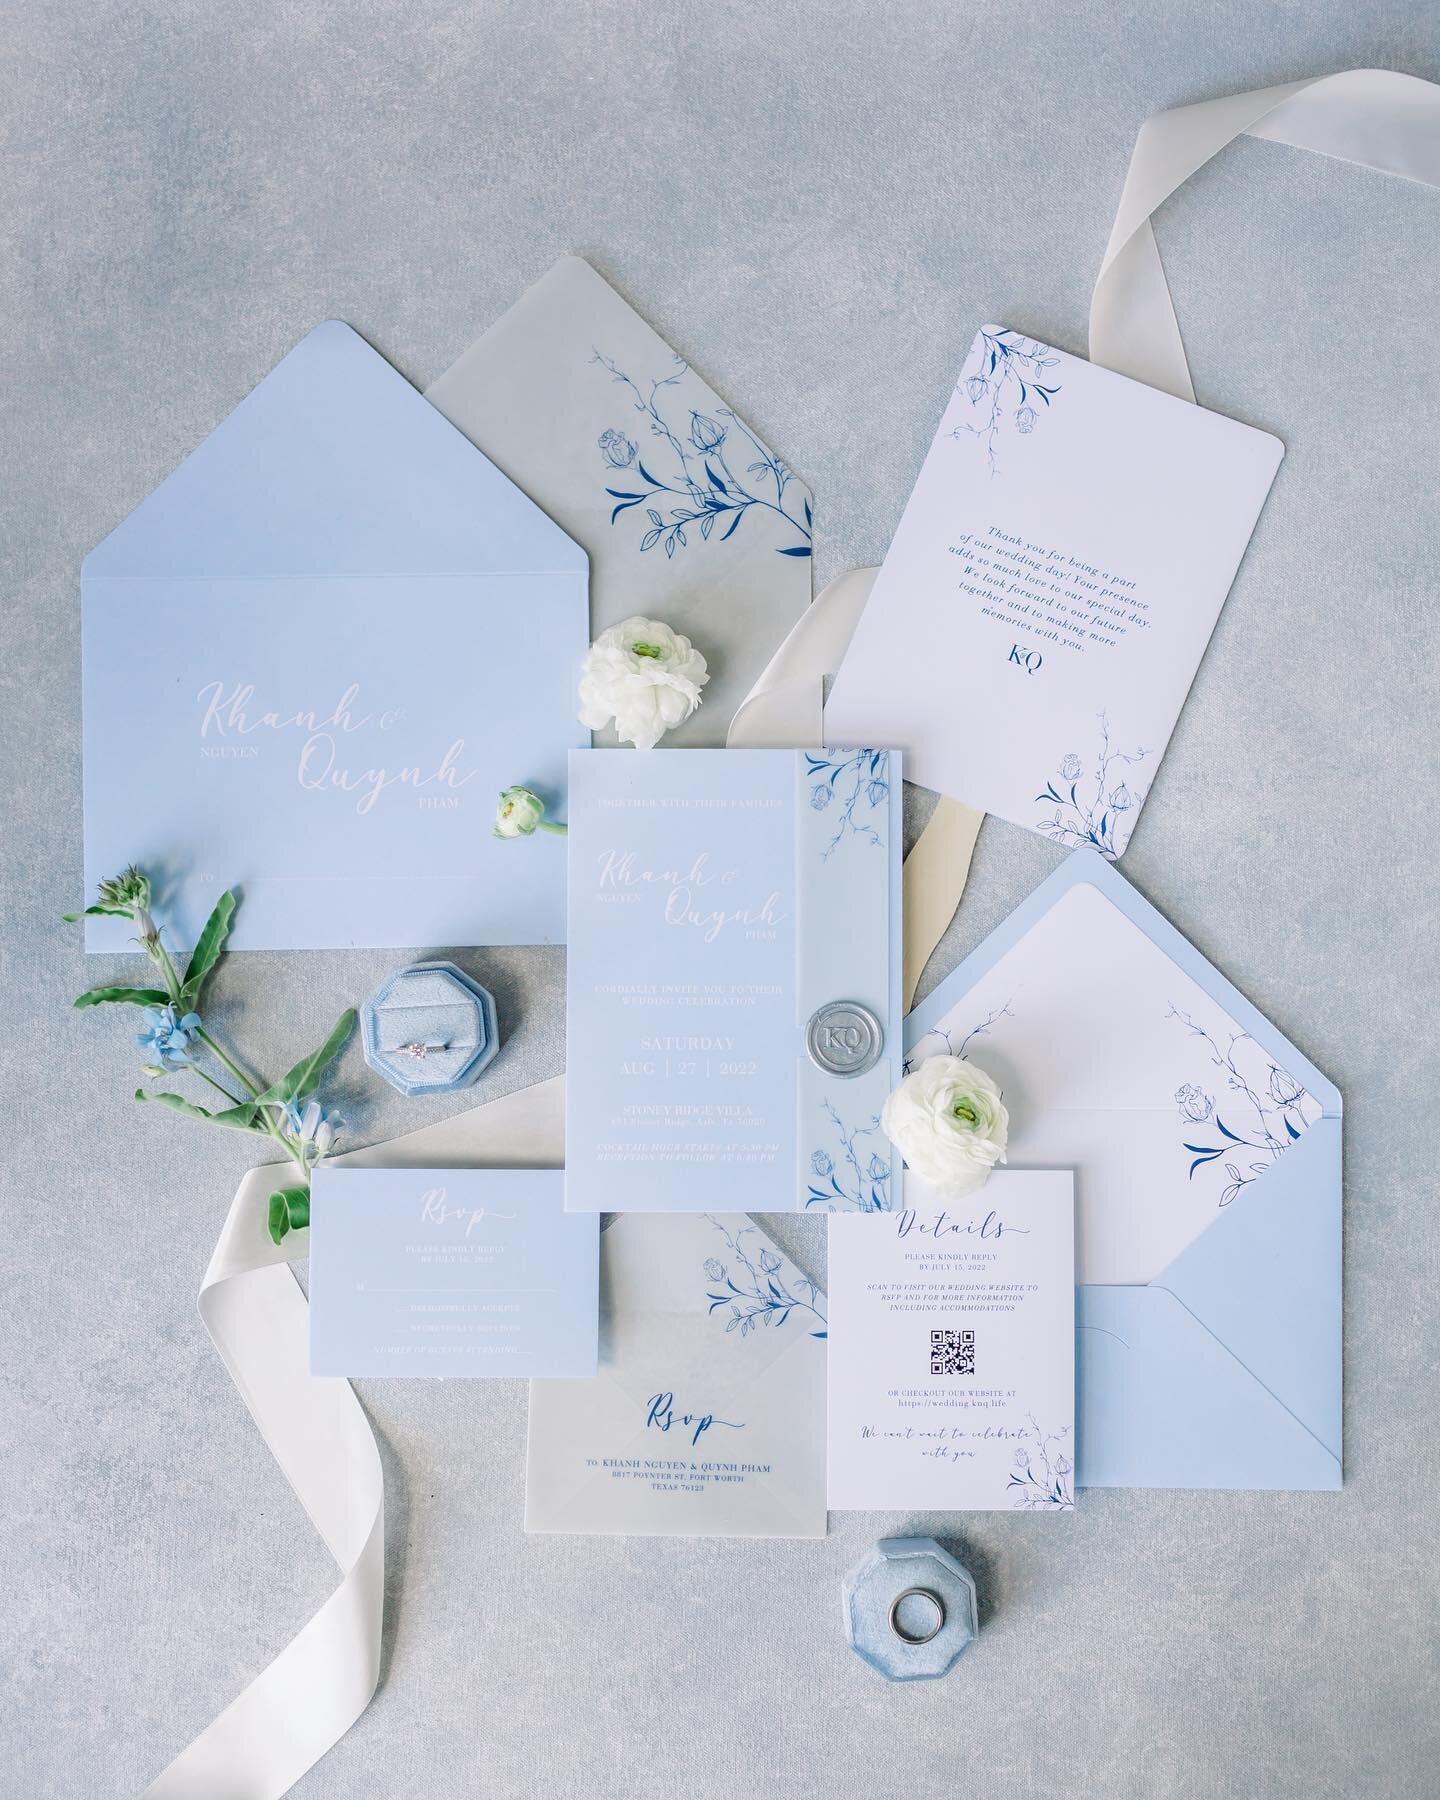 It&rsquo;s so surreal to be back home! Naturally, today will be a catch-up day so lots of errands and tasks to complete! 

In the meantime, here&rsquo;s a beautiful wedding stationery suite. Isn&rsquo;t the blue just so calming? Everything about this